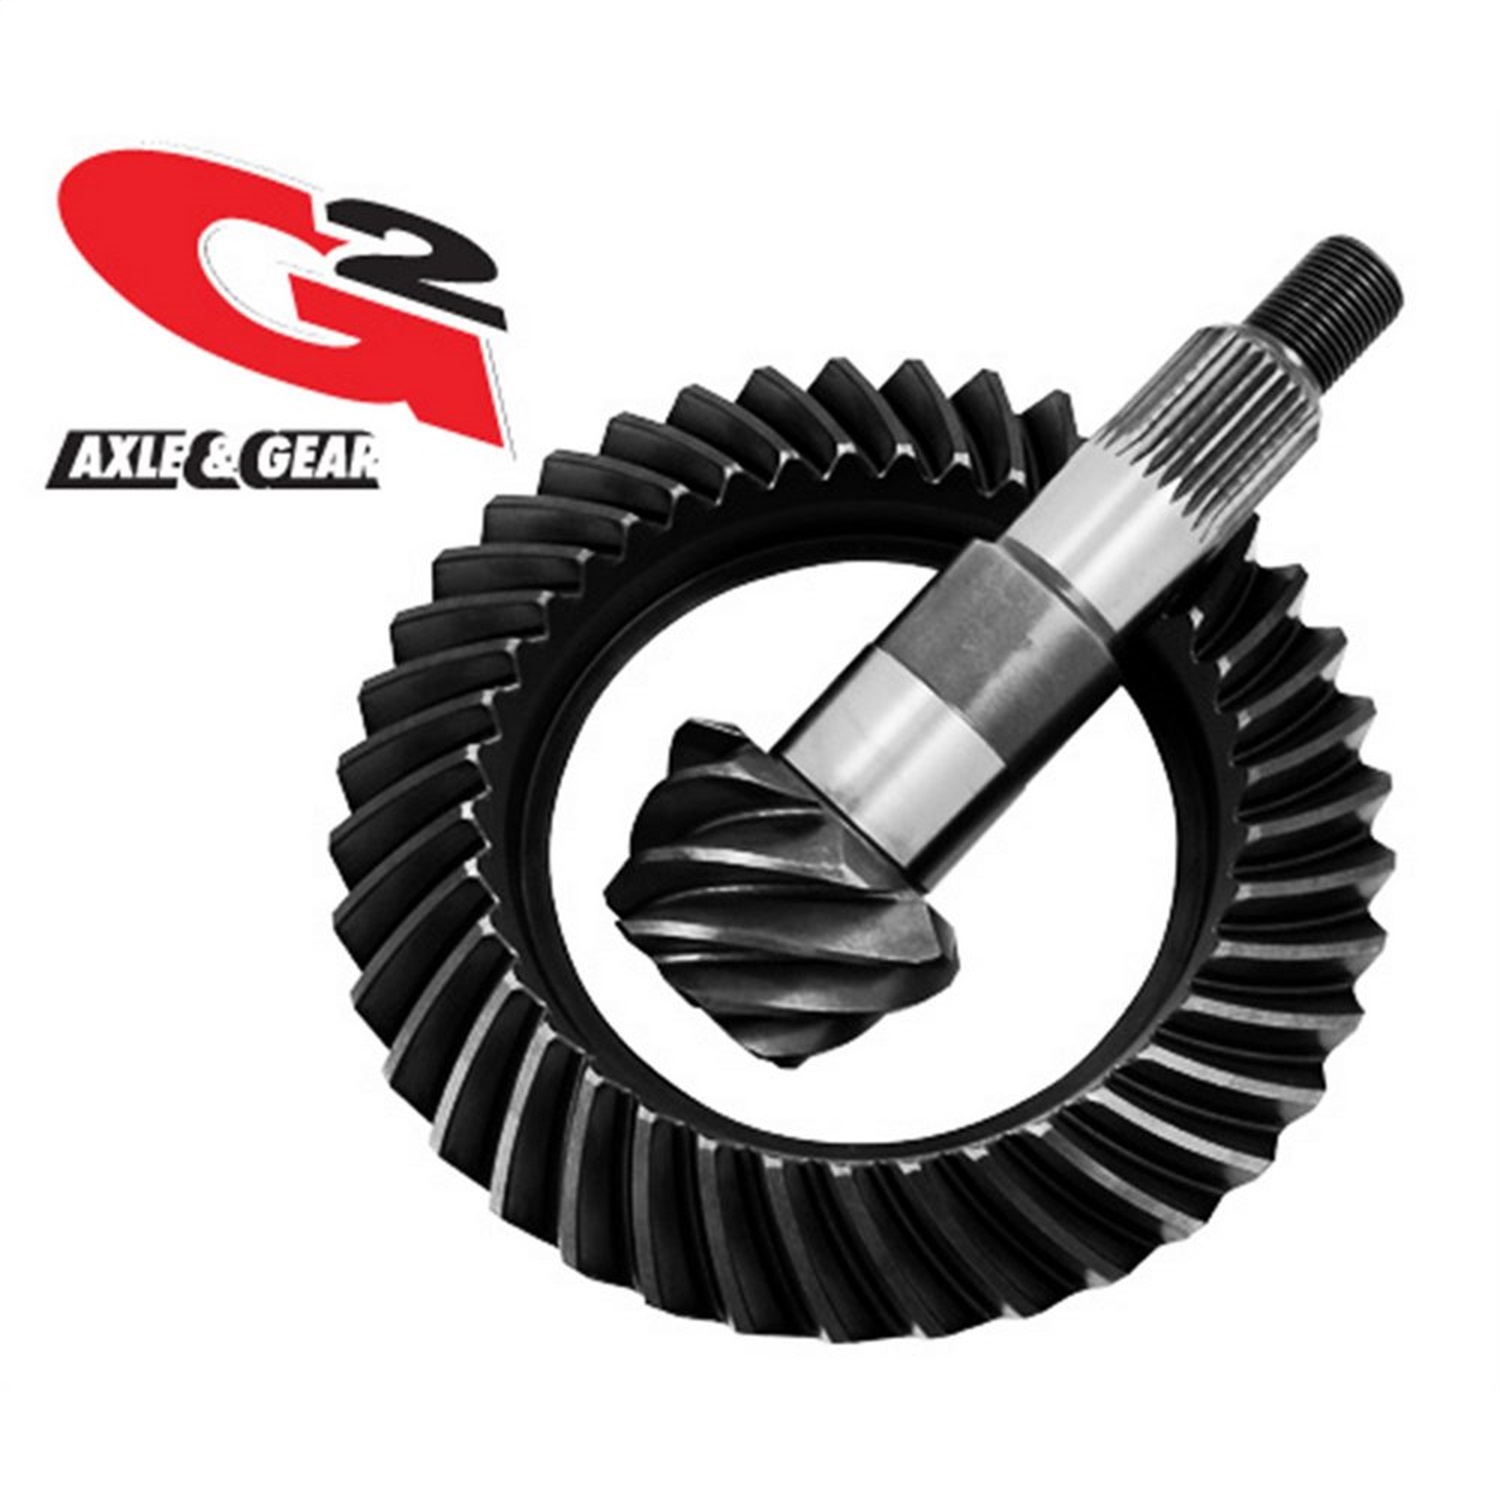 G2 Axle and Gear G2 Axle and Gear 2-2041-411 Ring and Pinion